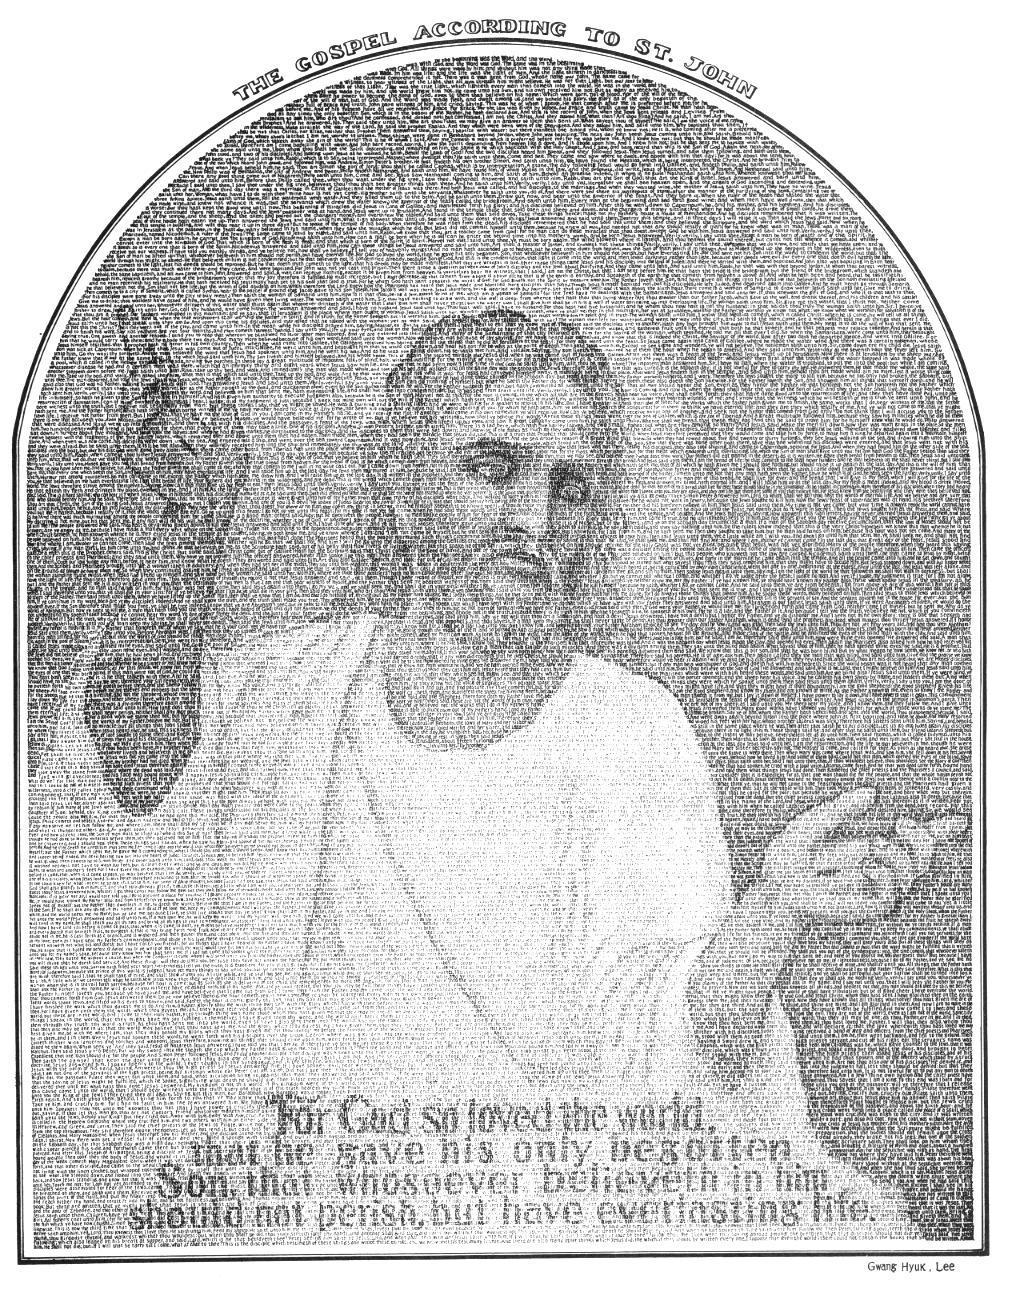 Portrait of Jesus using text from the Book of John